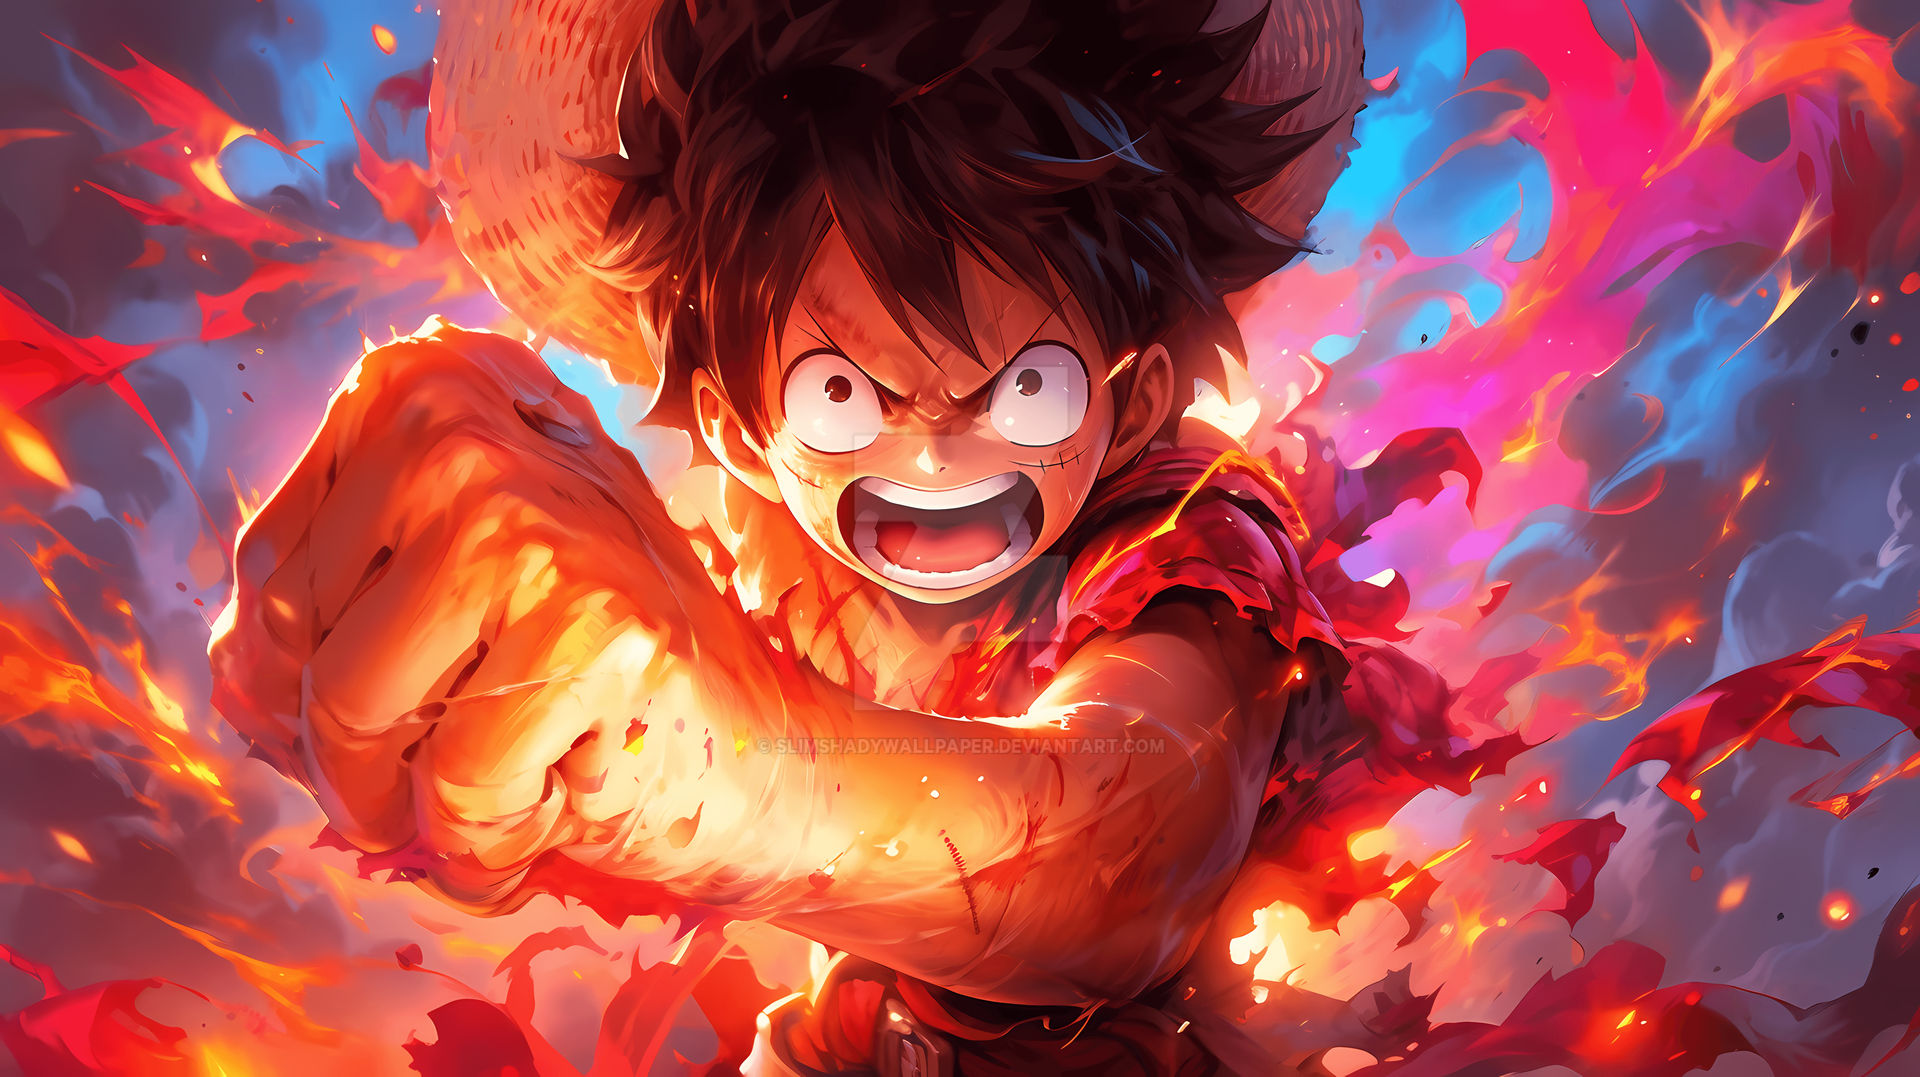 Luffy One Piece Animated Wallpaper by Favorisxp on DeviantArt